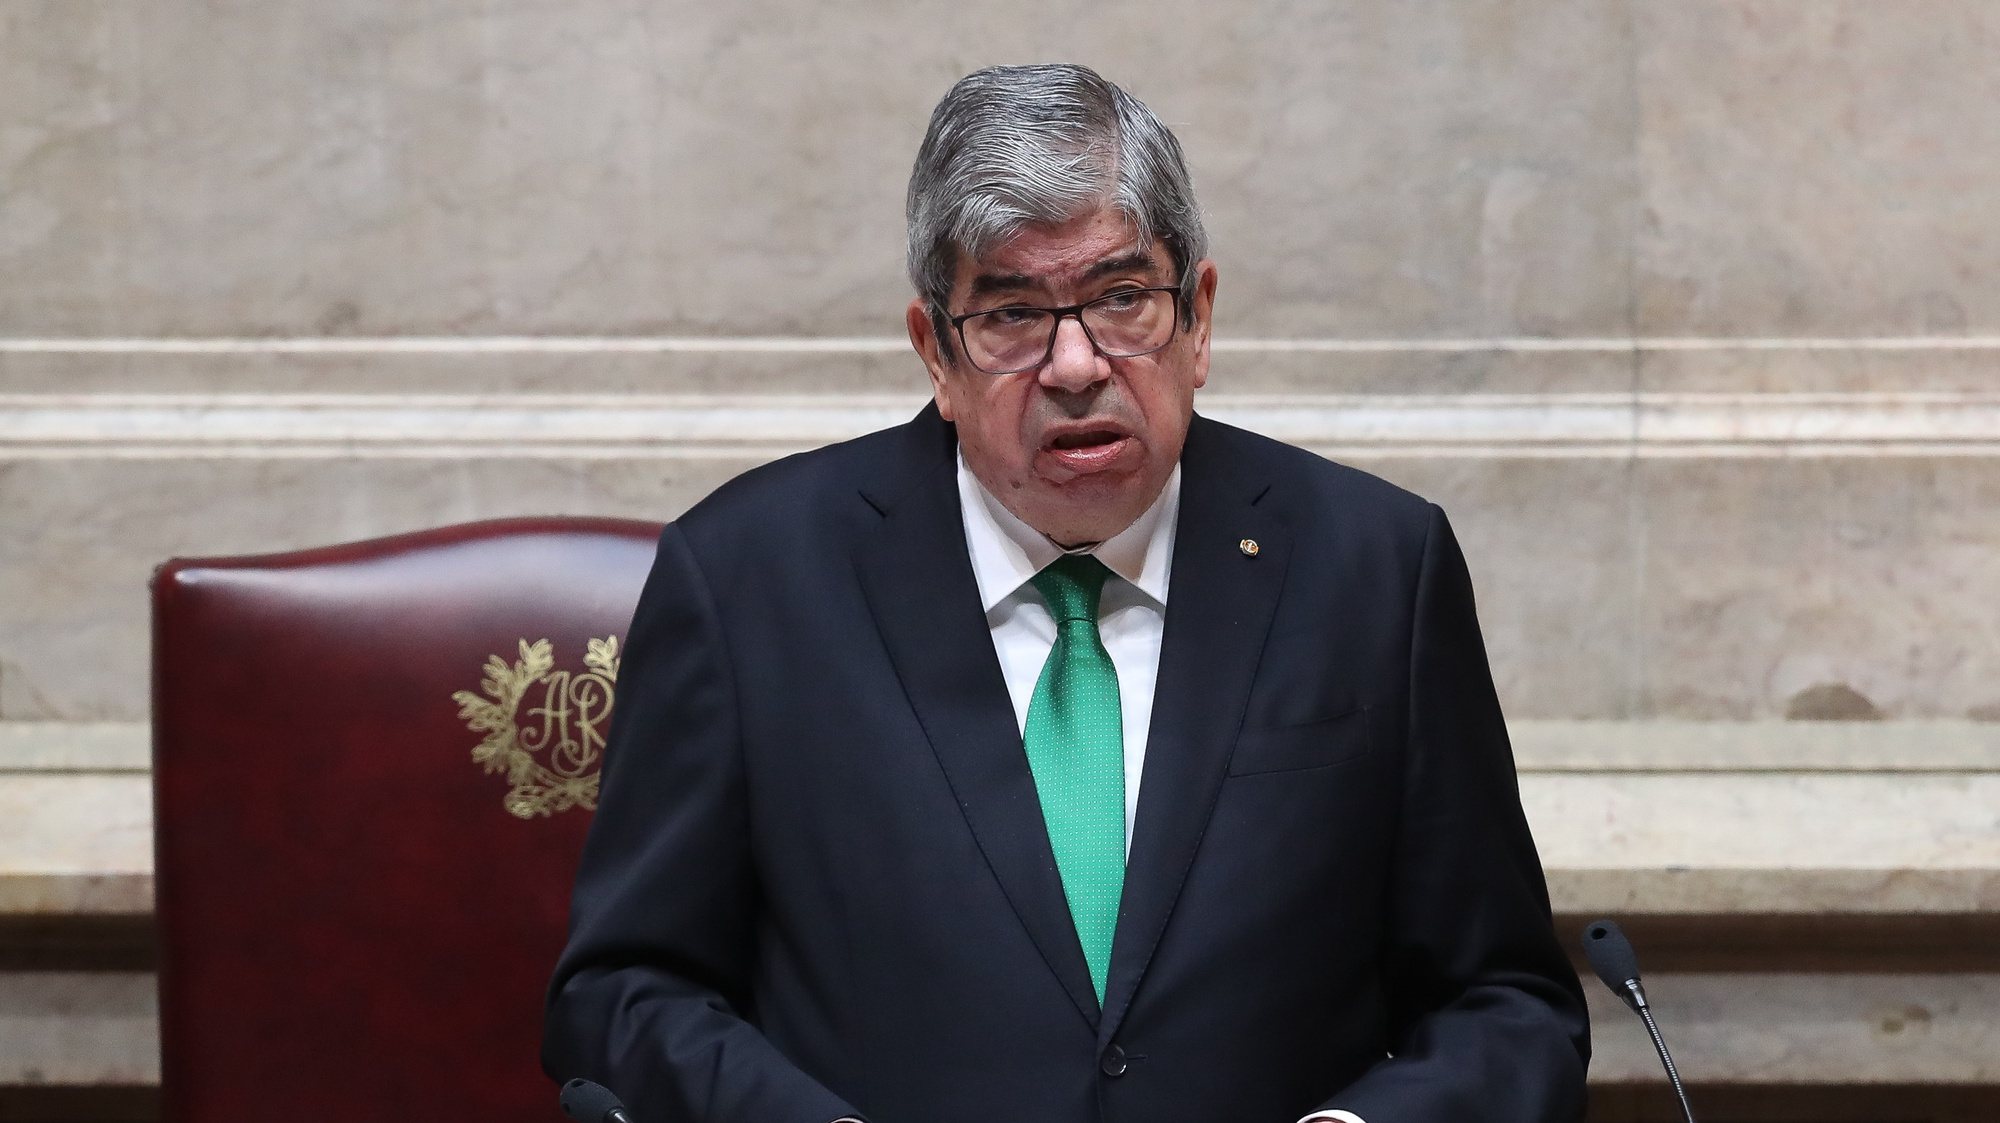 President of the Parliament Eduardo Ferro Rodrigues speeches during the swearing ceremony of Marcelo Rebelo de Sousa for a second term as President of the Republic at Portuguese Parliament in Lisbon, Portugal, 09 March 2021. Reelected in the January 24 presidential elections with 60.67% of the votes cast, the 72-year-old retired law professor, a former constituent deputy, will be sworn in on the original of the Constitution of the Portuguese Republic. MARIO CRUZ/LUSA